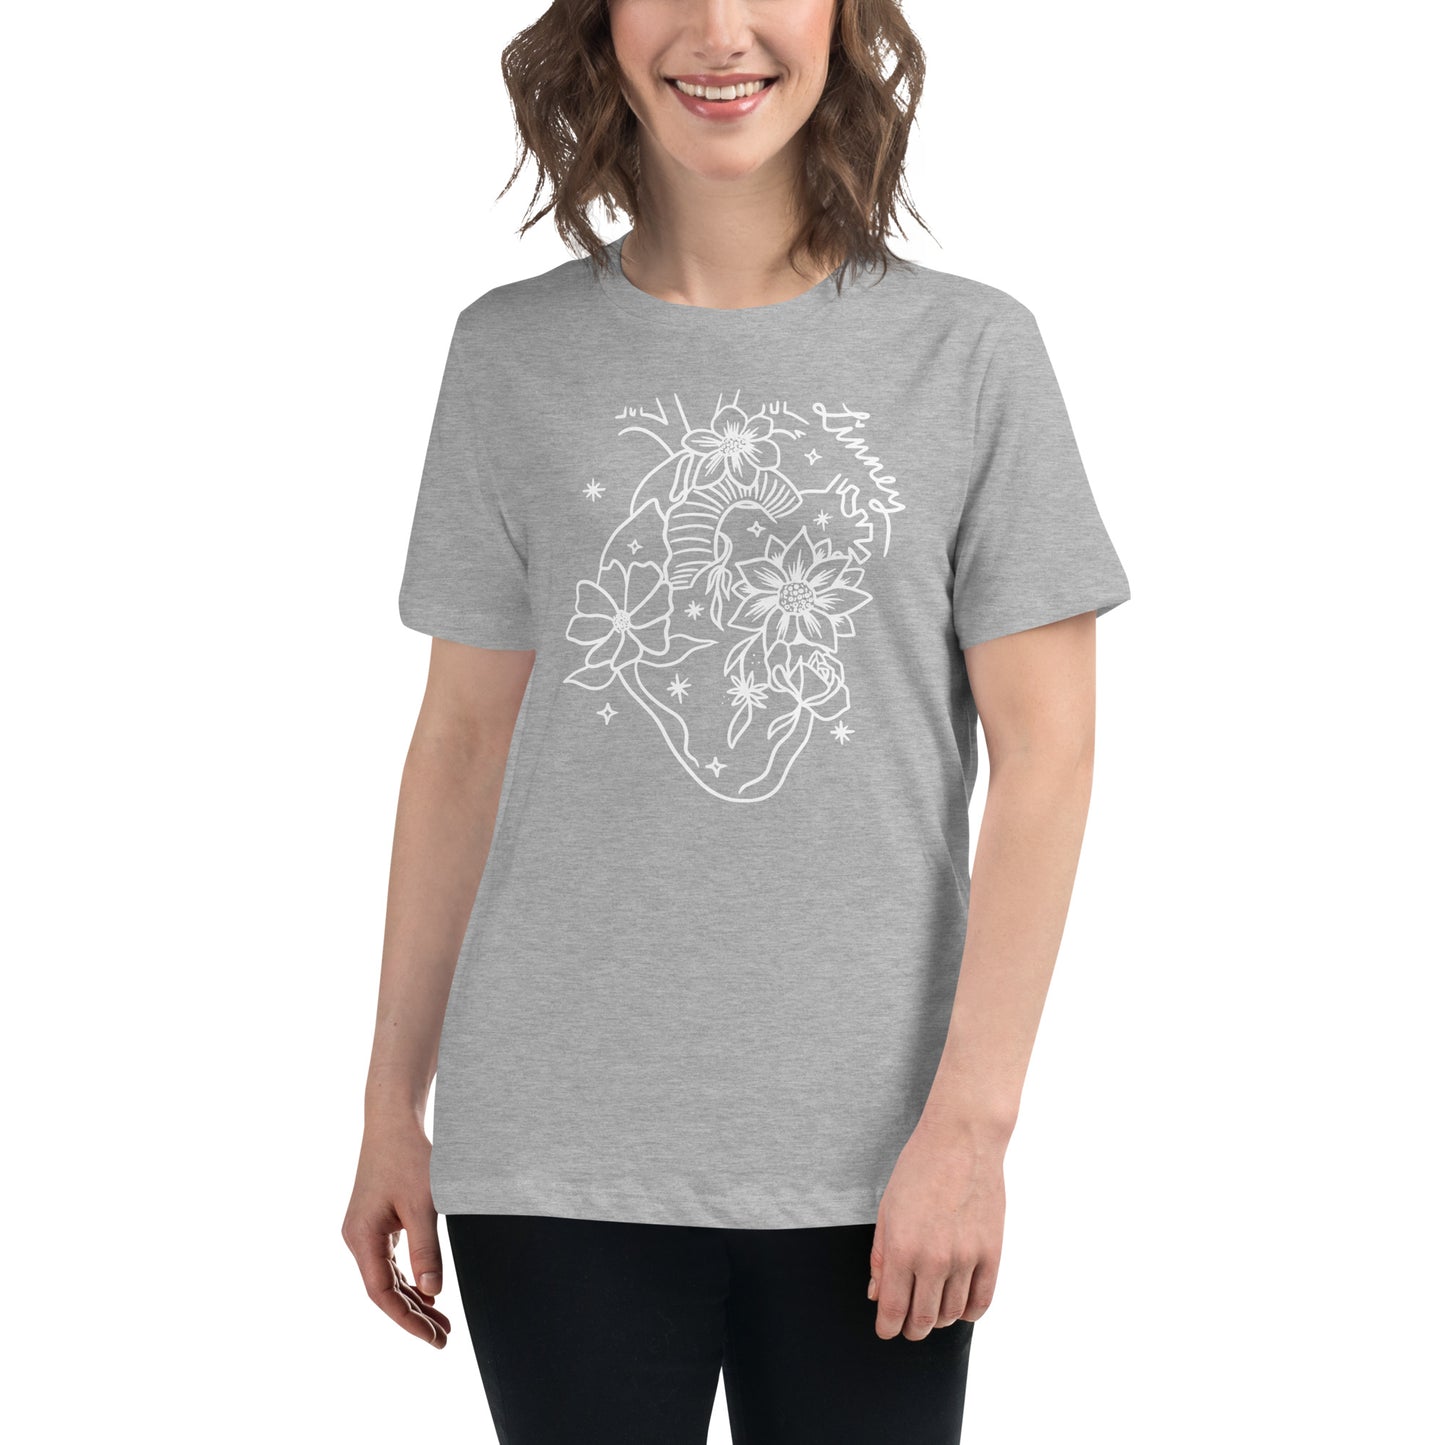 Flowers Grow From Inside Out (White) - Women's Relaxed Tee